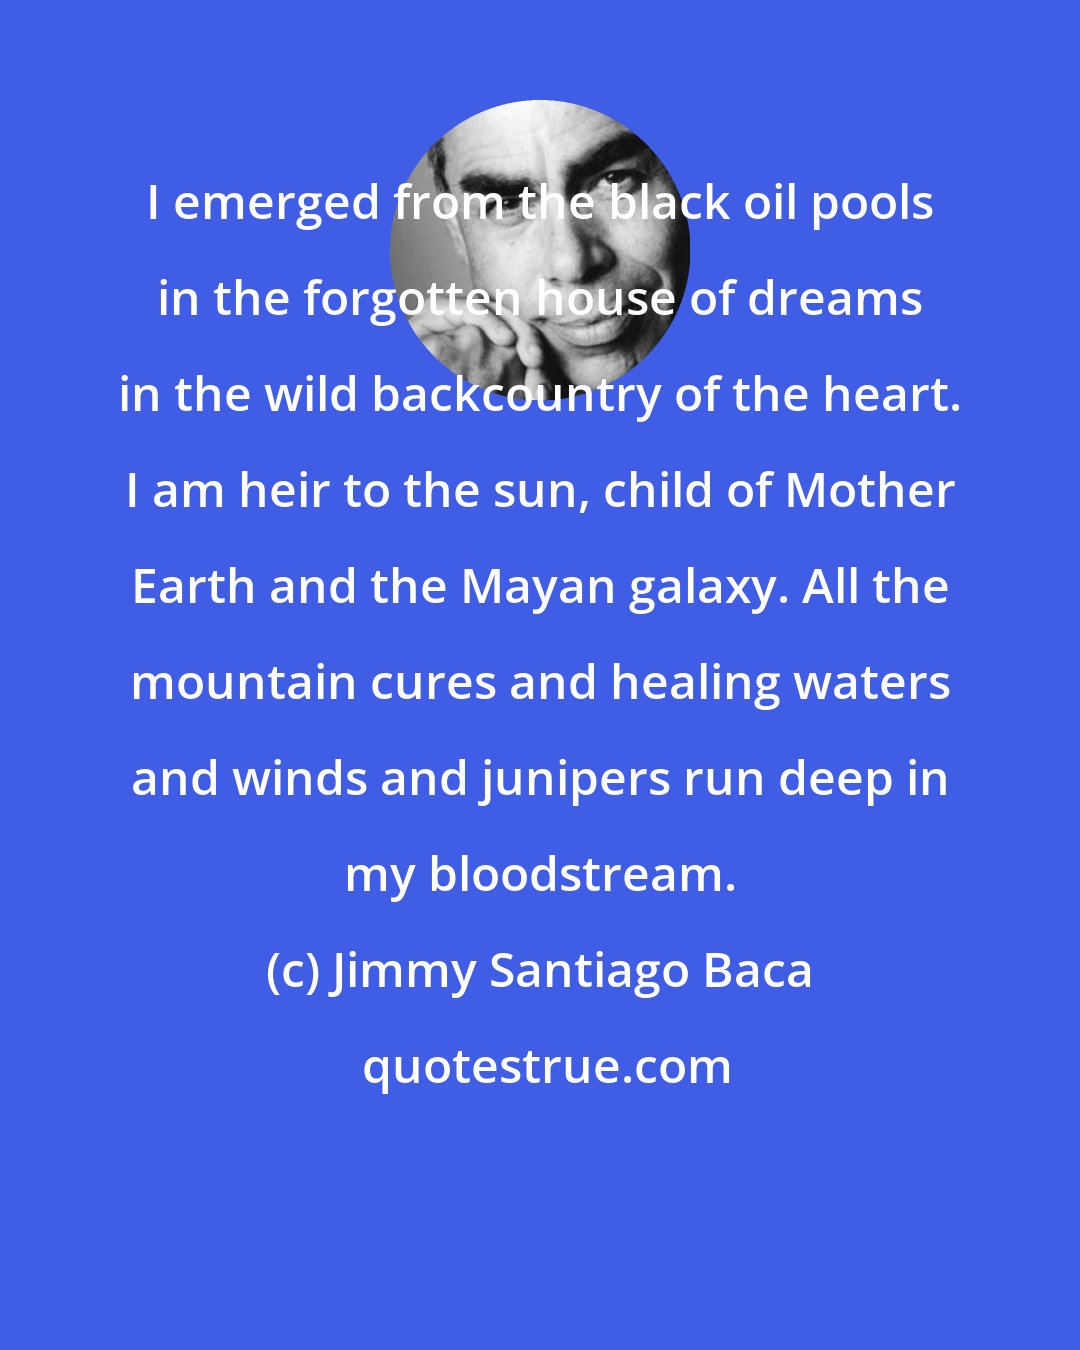 Jimmy Santiago Baca: I emerged from the black oil pools in the forgotten house of dreams in the wild backcountry of the heart. I am heir to the sun, child of Mother Earth and the Mayan galaxy. All the mountain cures and healing waters and winds and junipers run deep in my bloodstream.